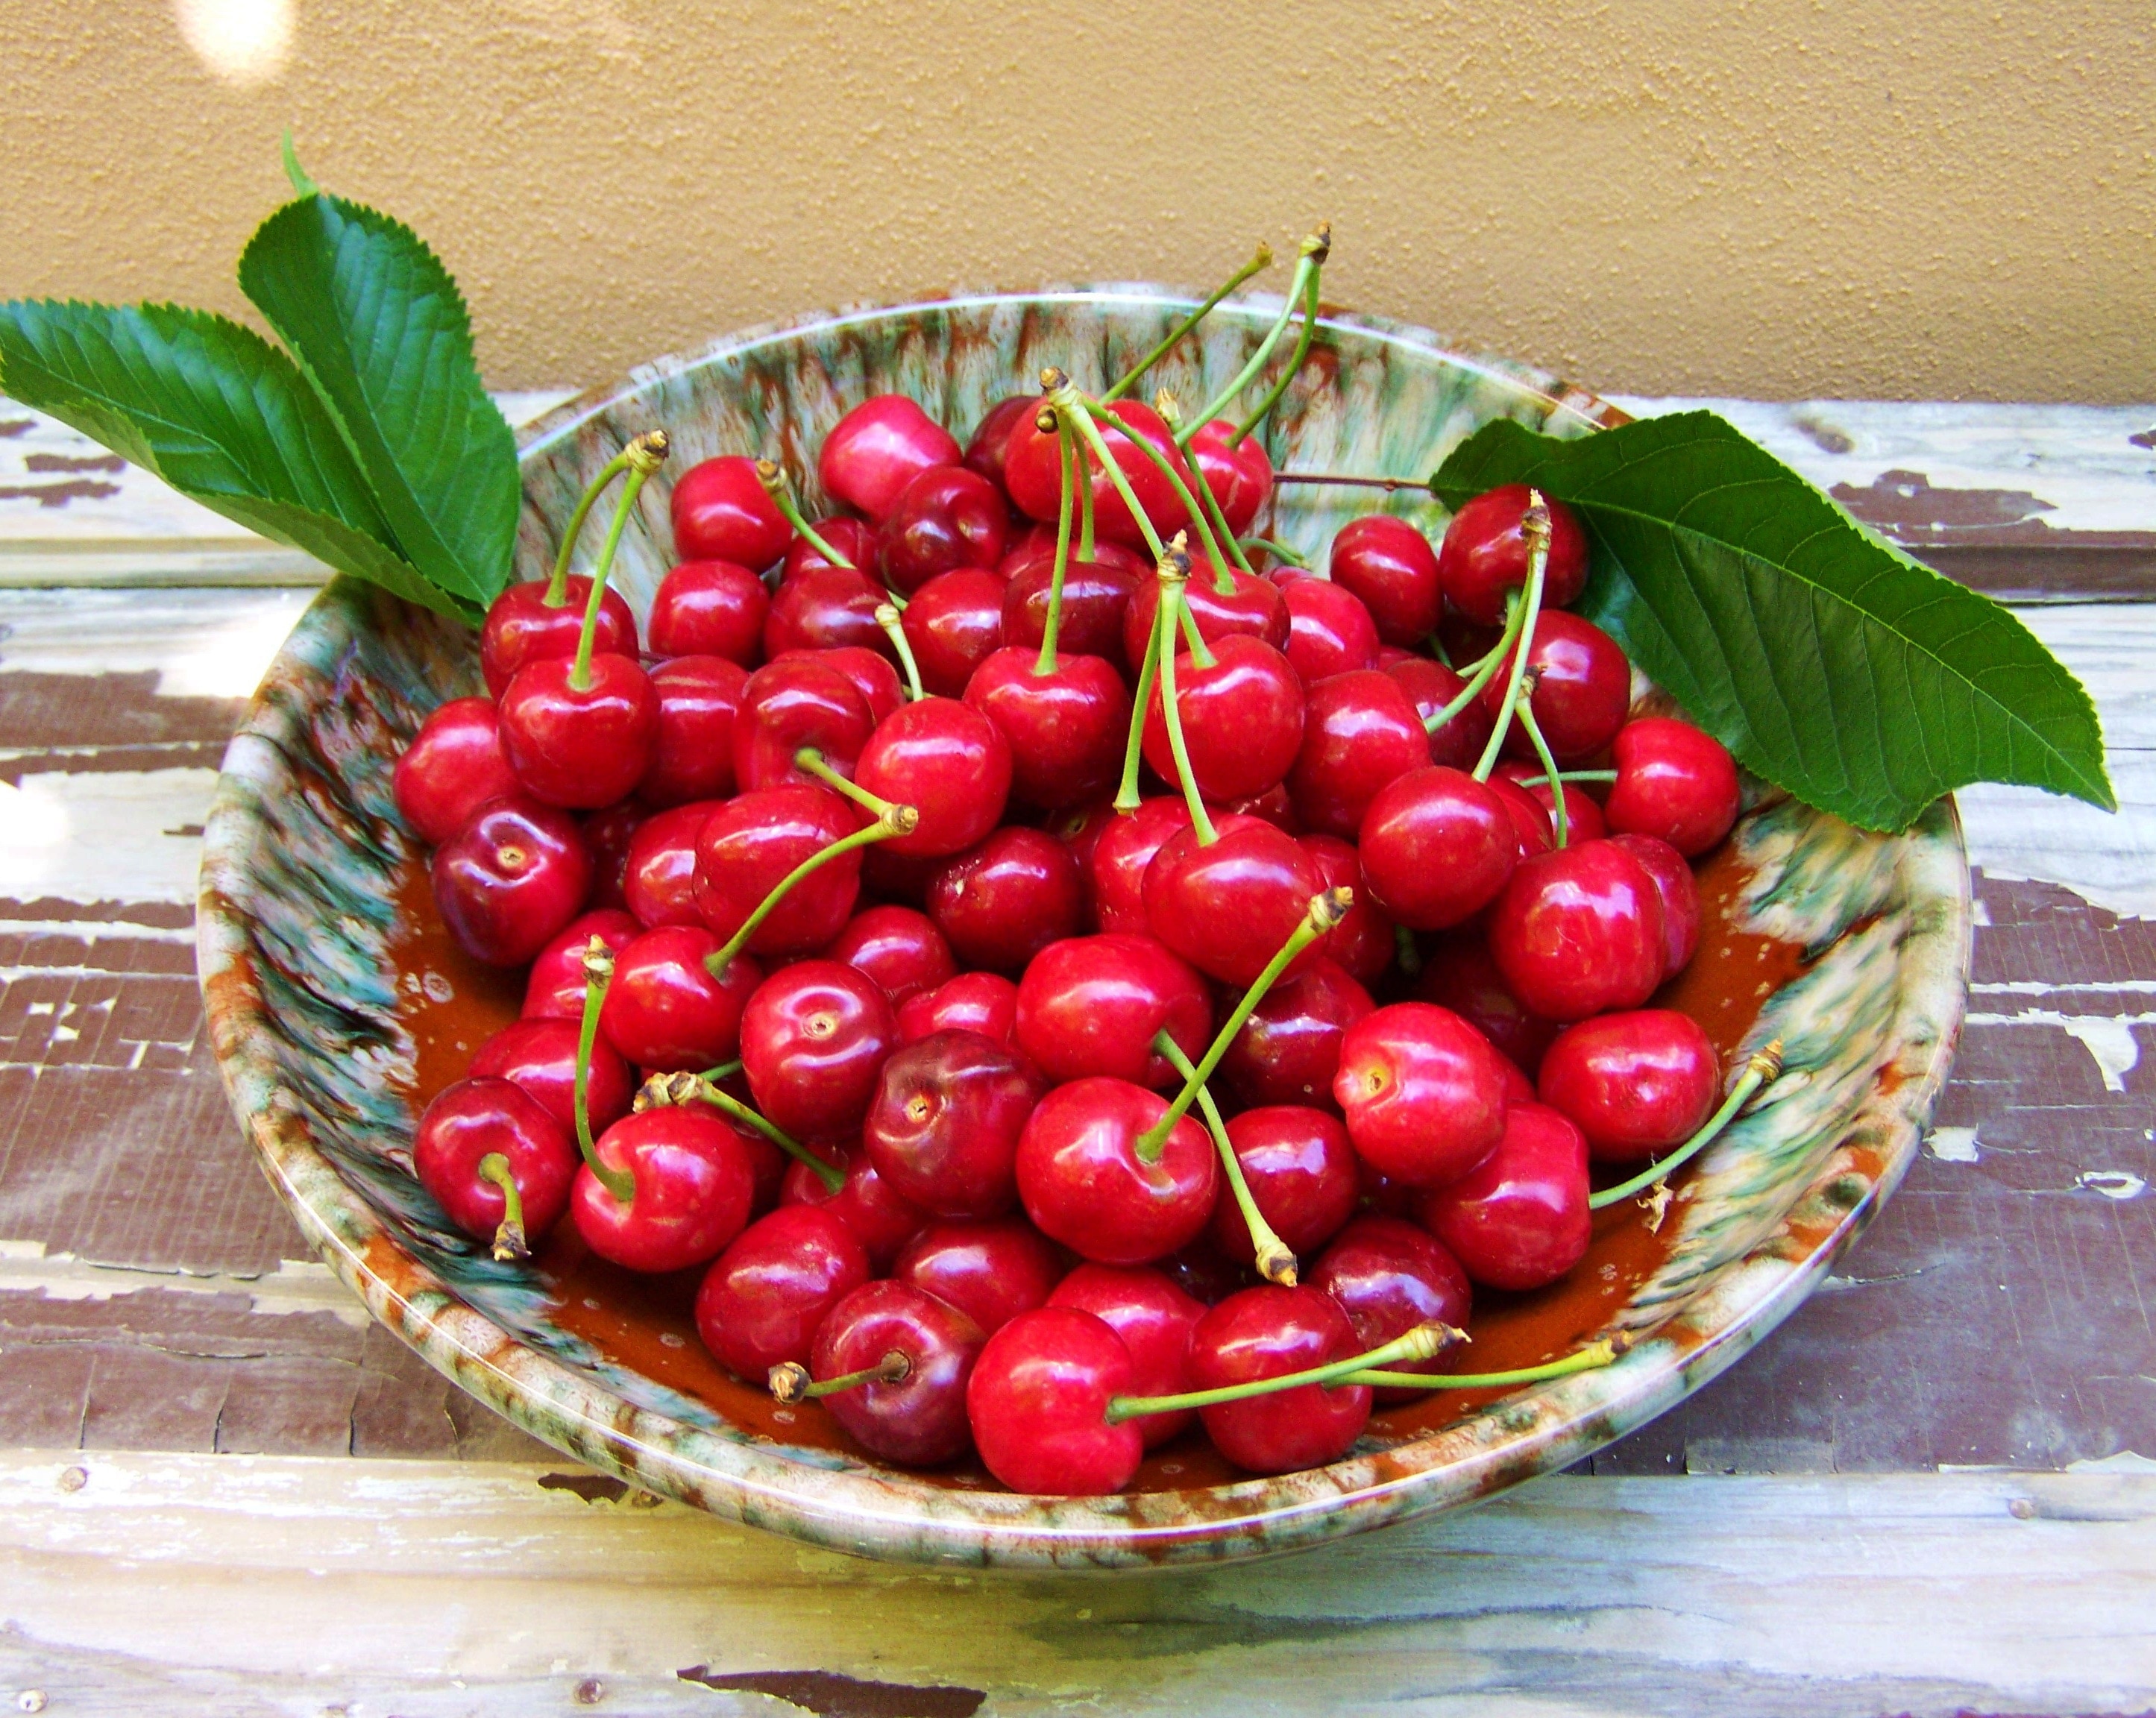 pile of red round fruit